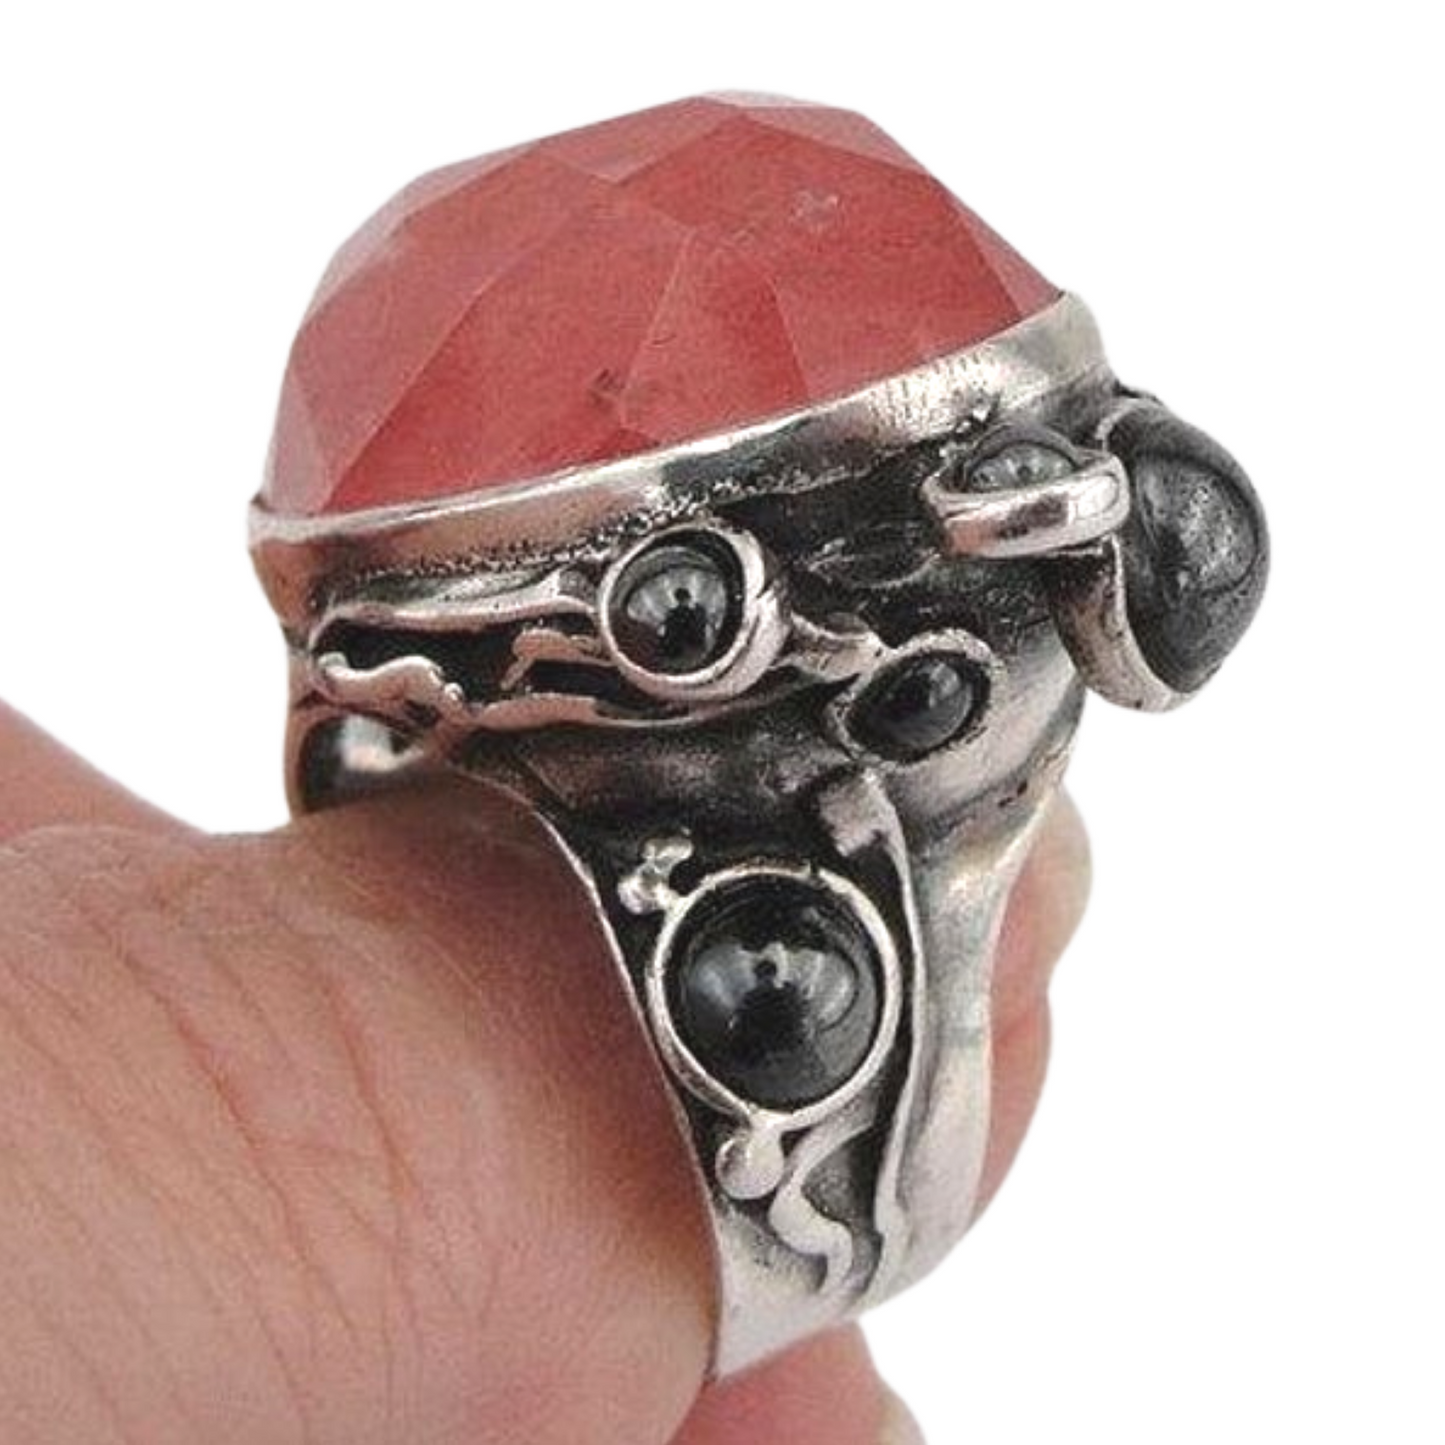 Oval Silver rose quartz Ring with black pearls